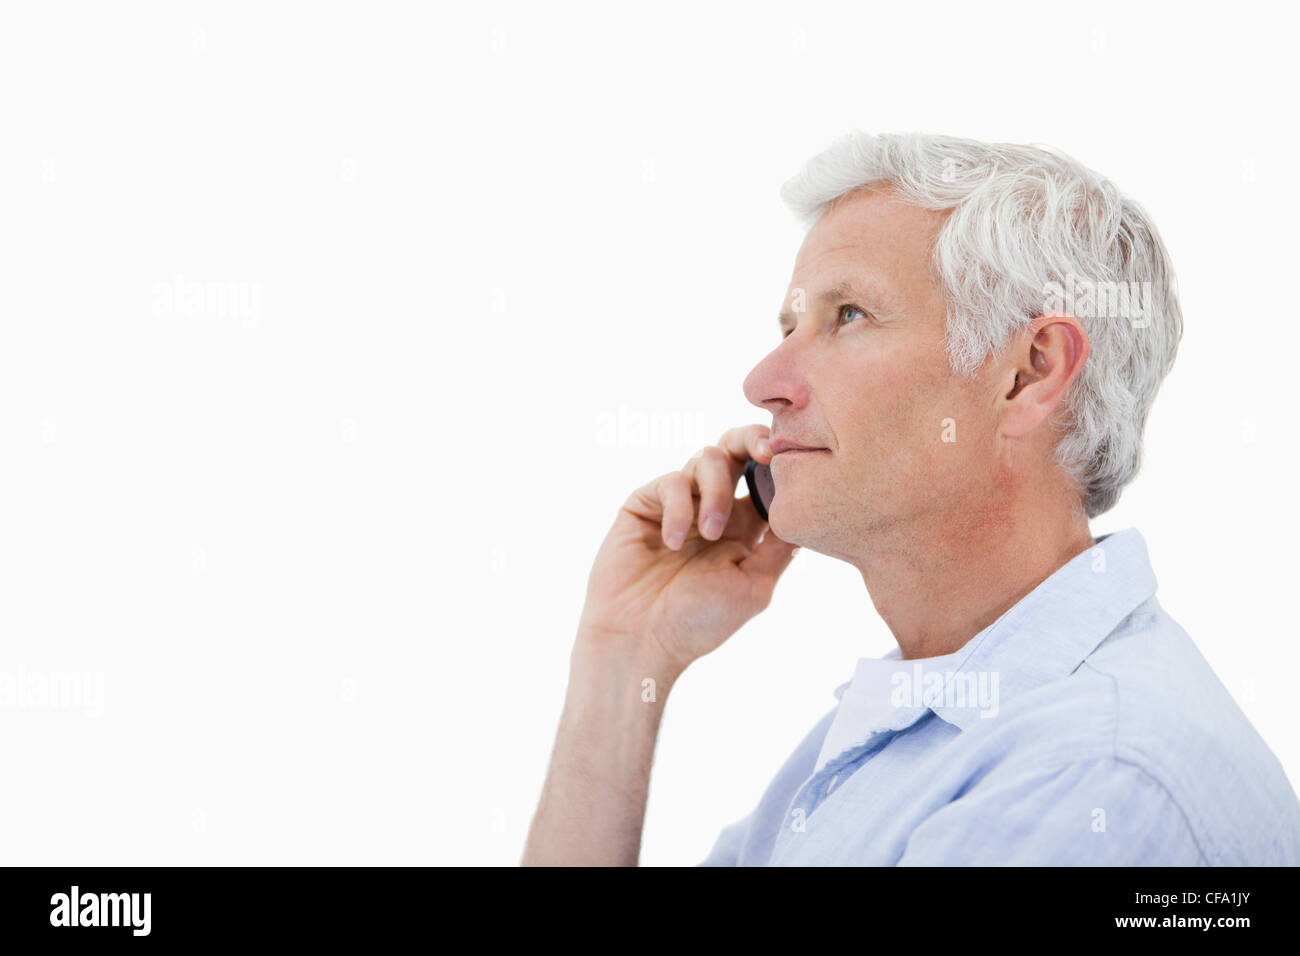 Side view of a man making a phone call Stock Photo